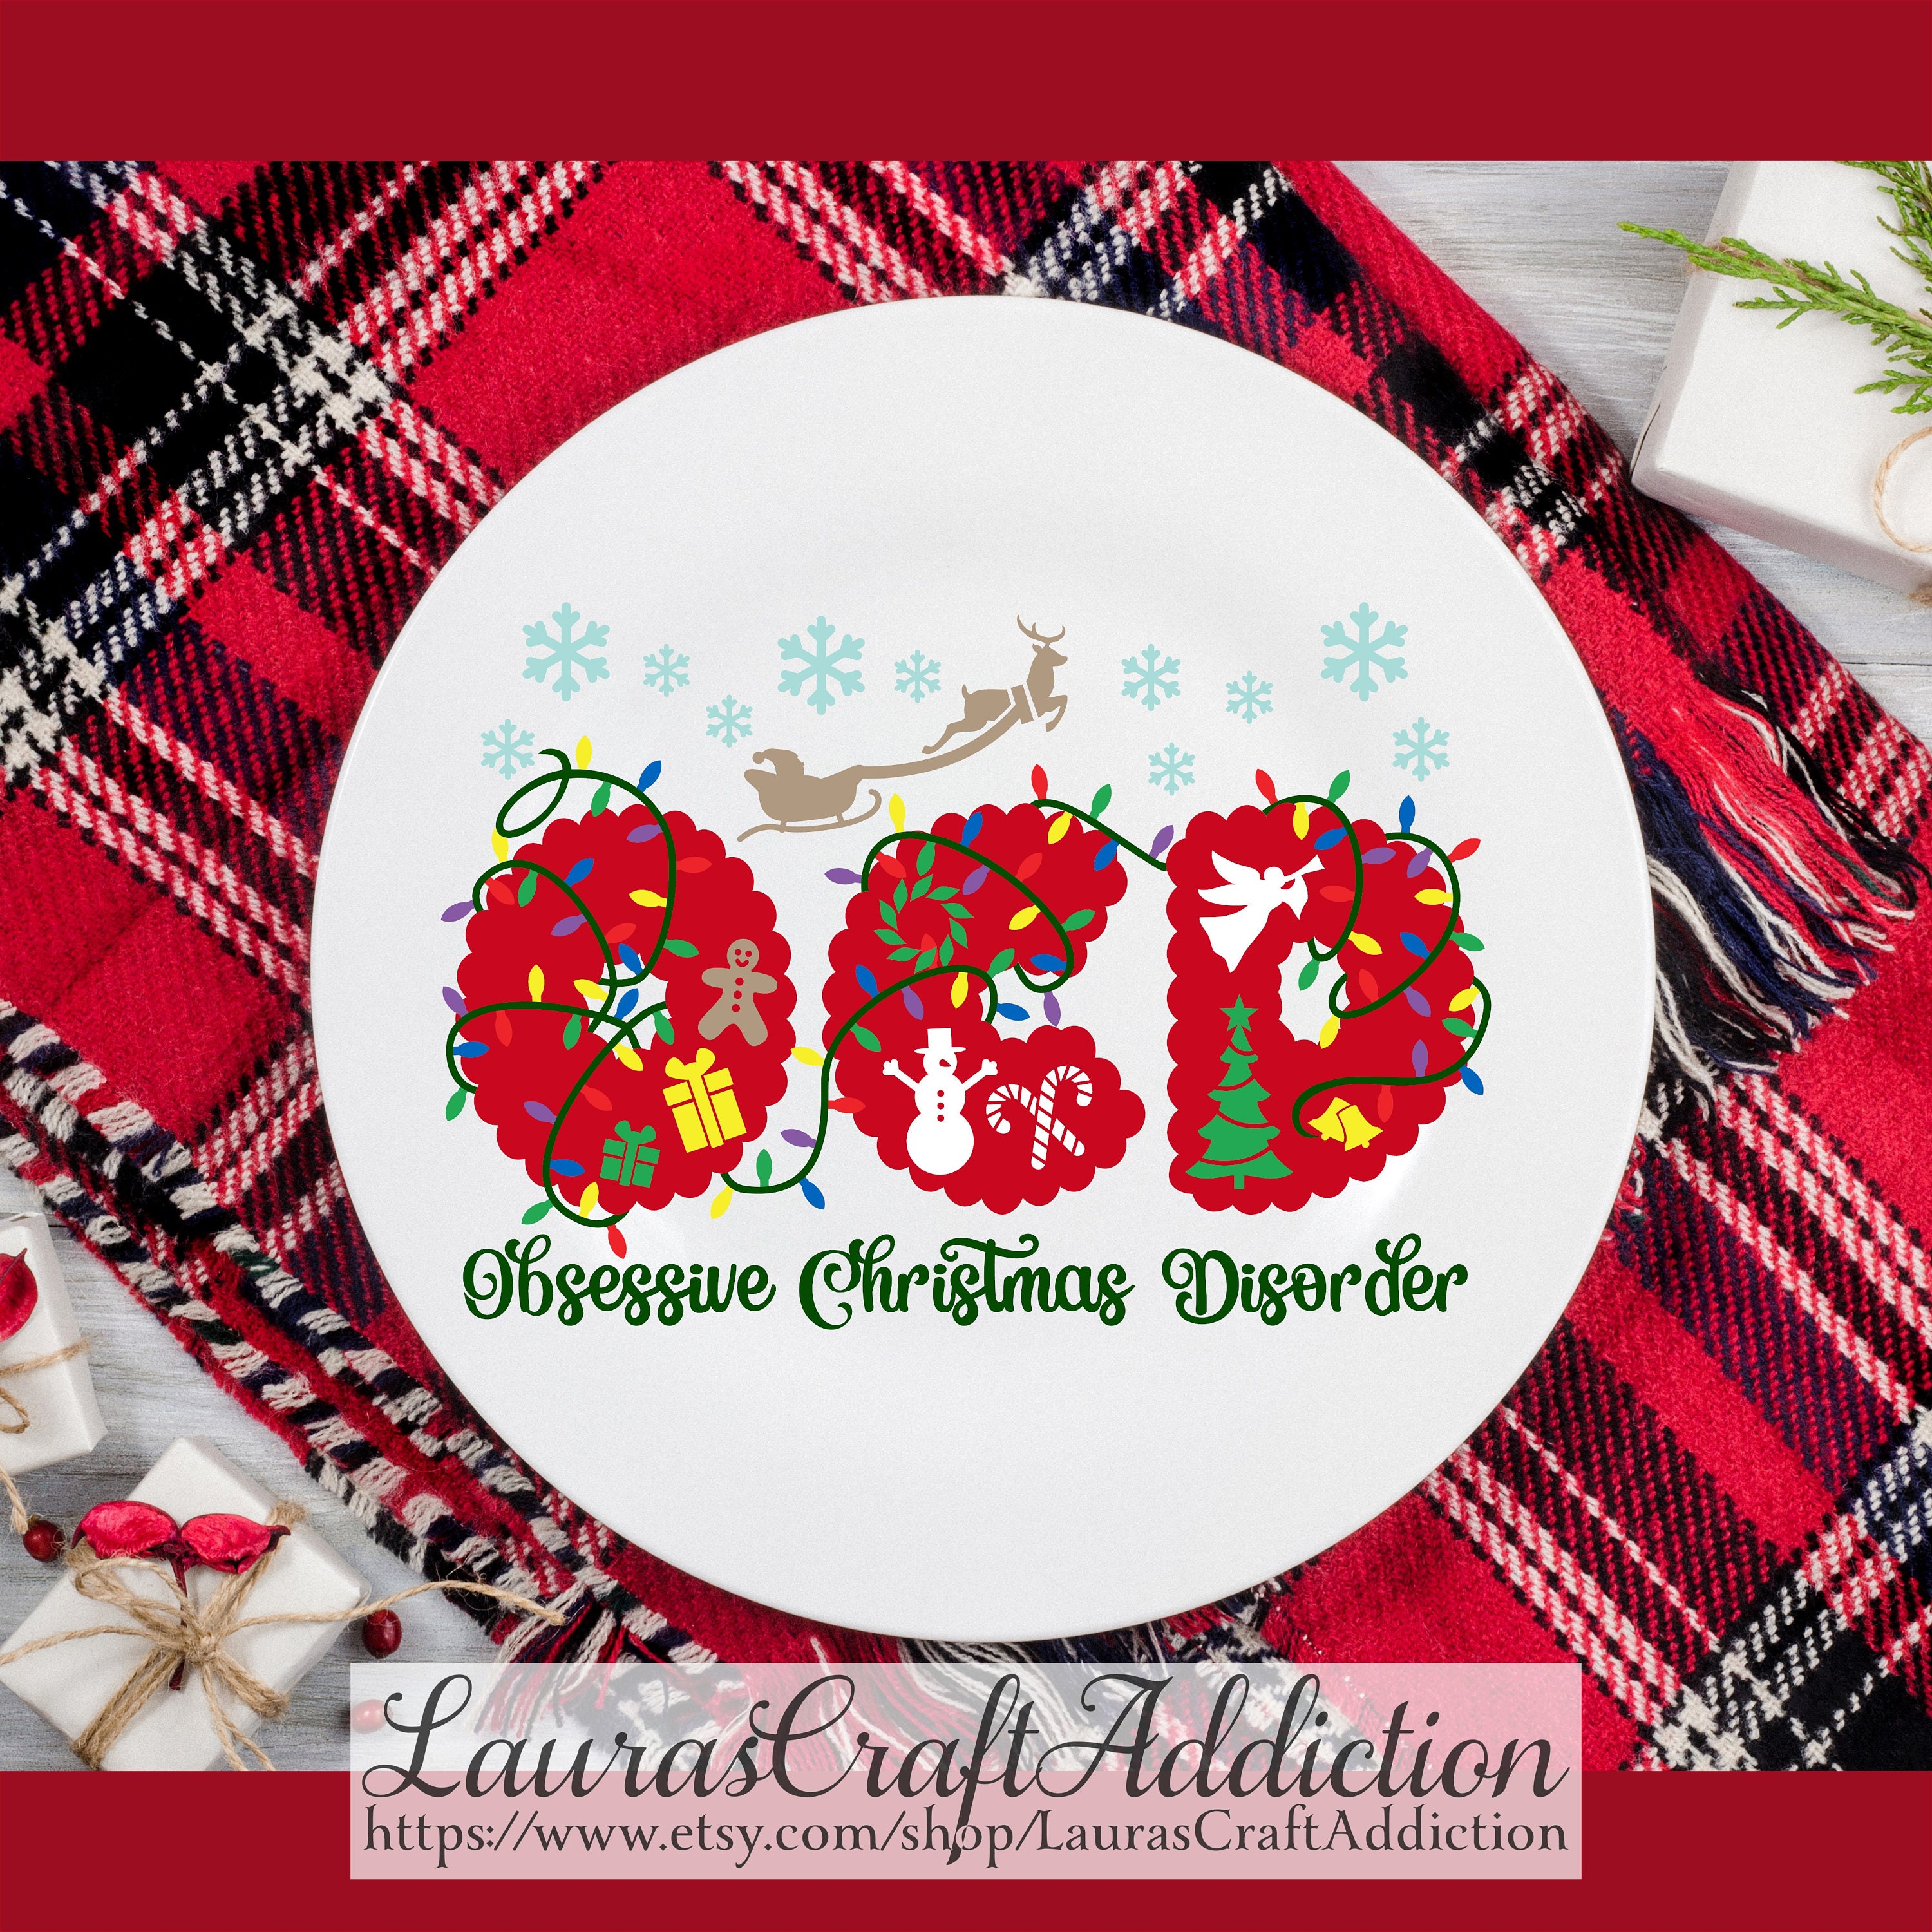 OCD Obsessive Christmas Disorder Svg Dxf Pdf Png Cut Files | Etsy